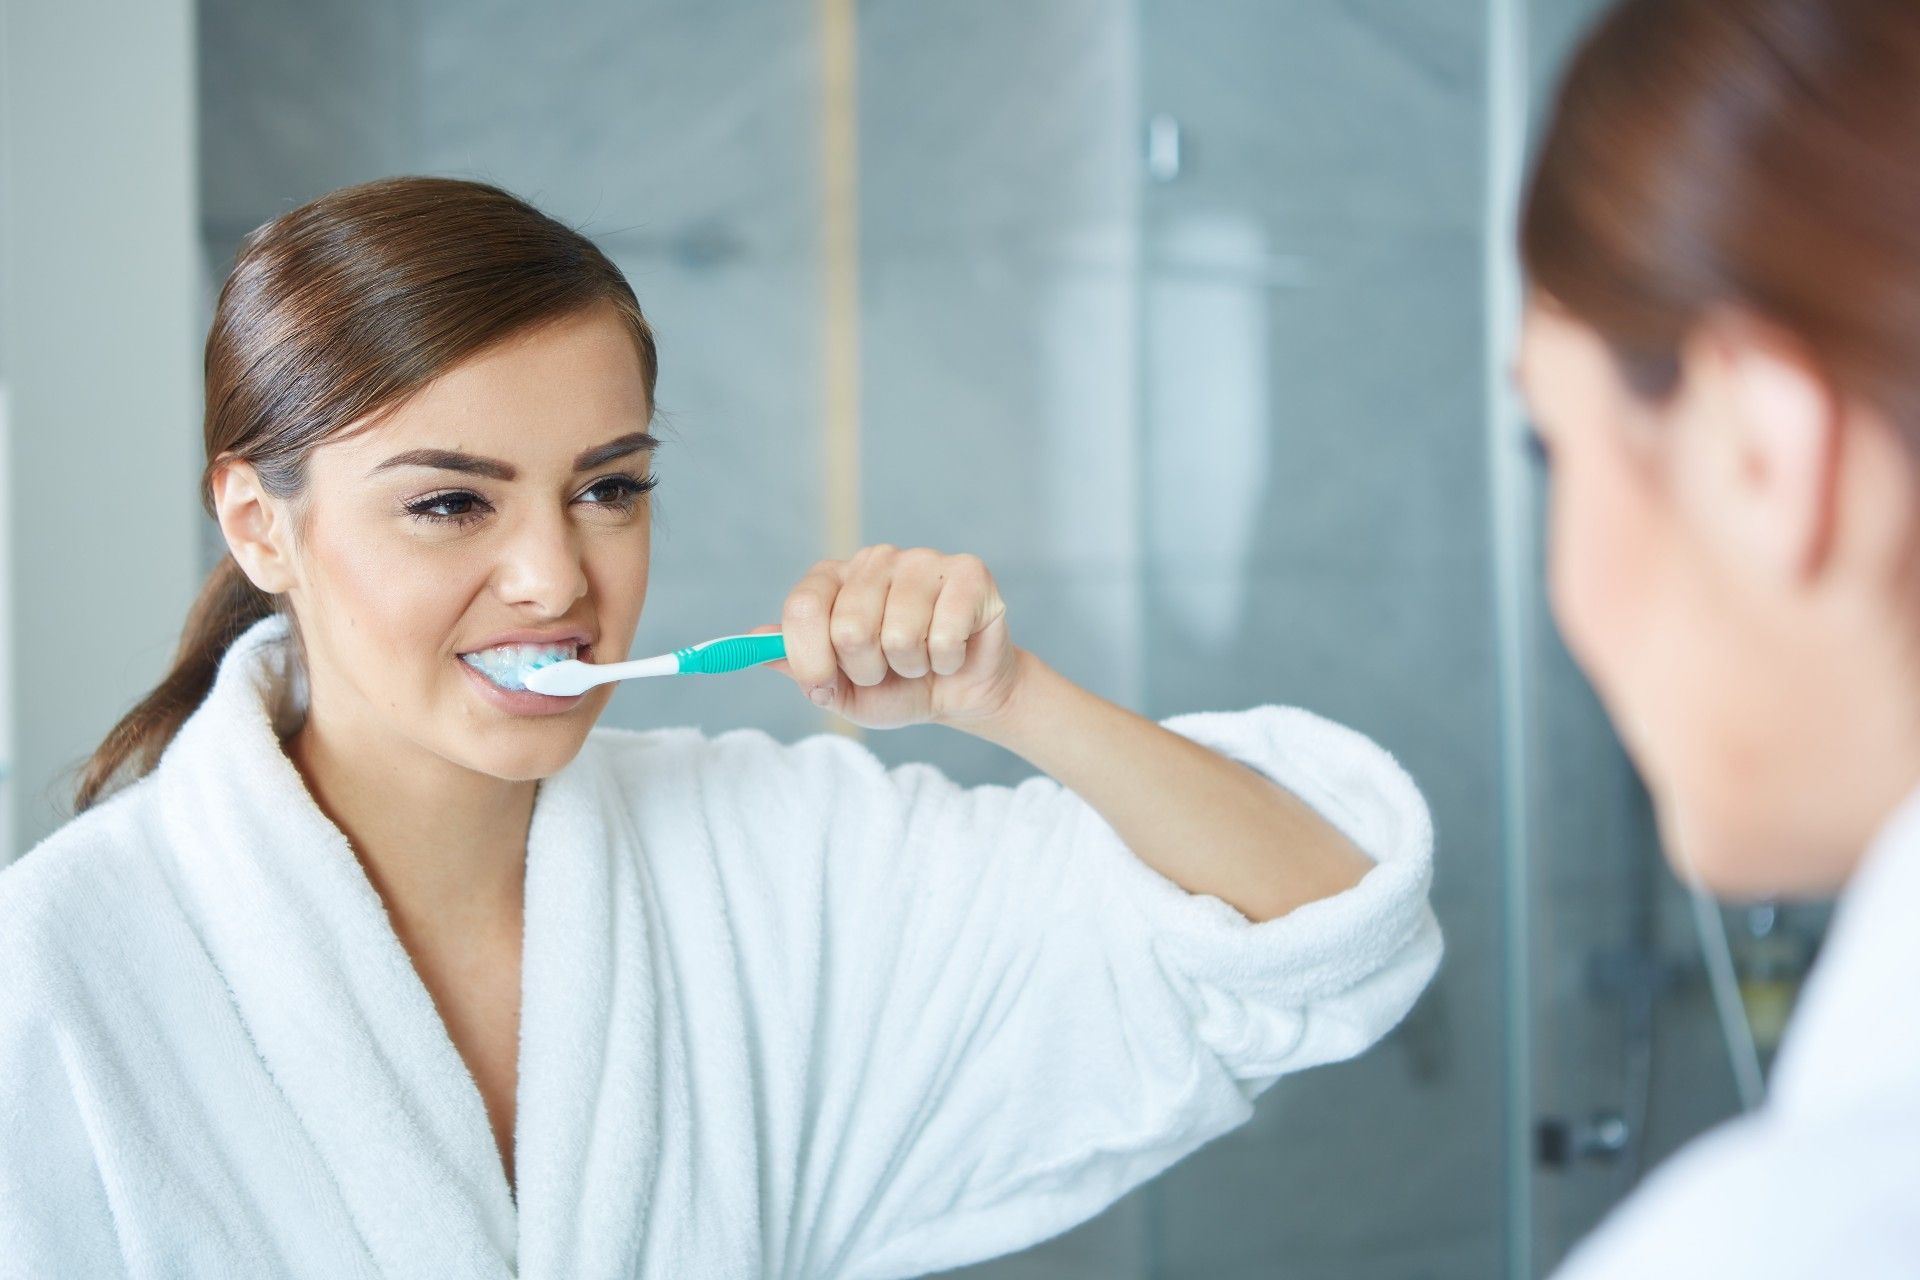 A woman brushes her face in front of a bathroom mirror - Crest toothpaste